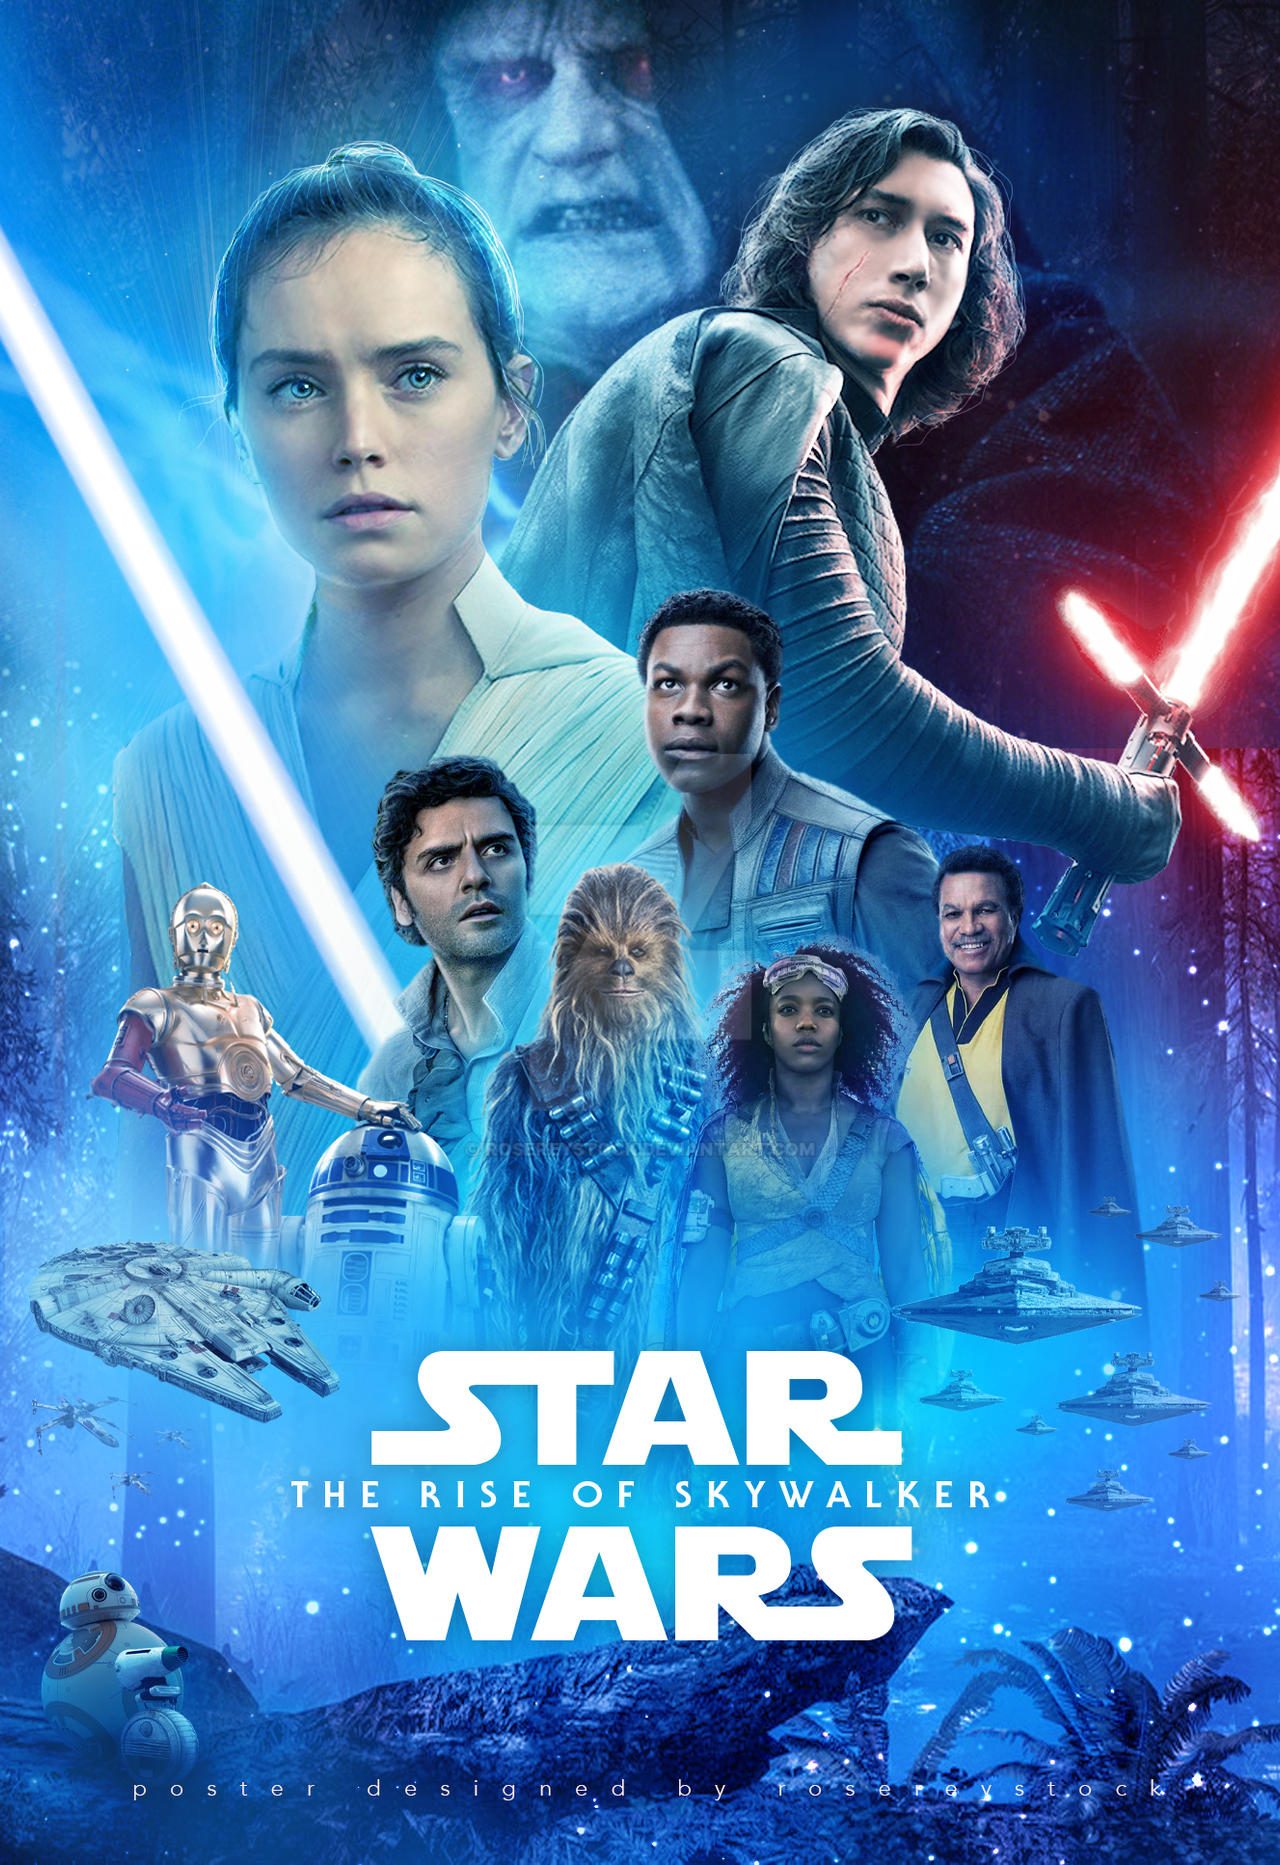 Star Wars The Rise Of Skywalker Poster By Rosereystock On Deviantart